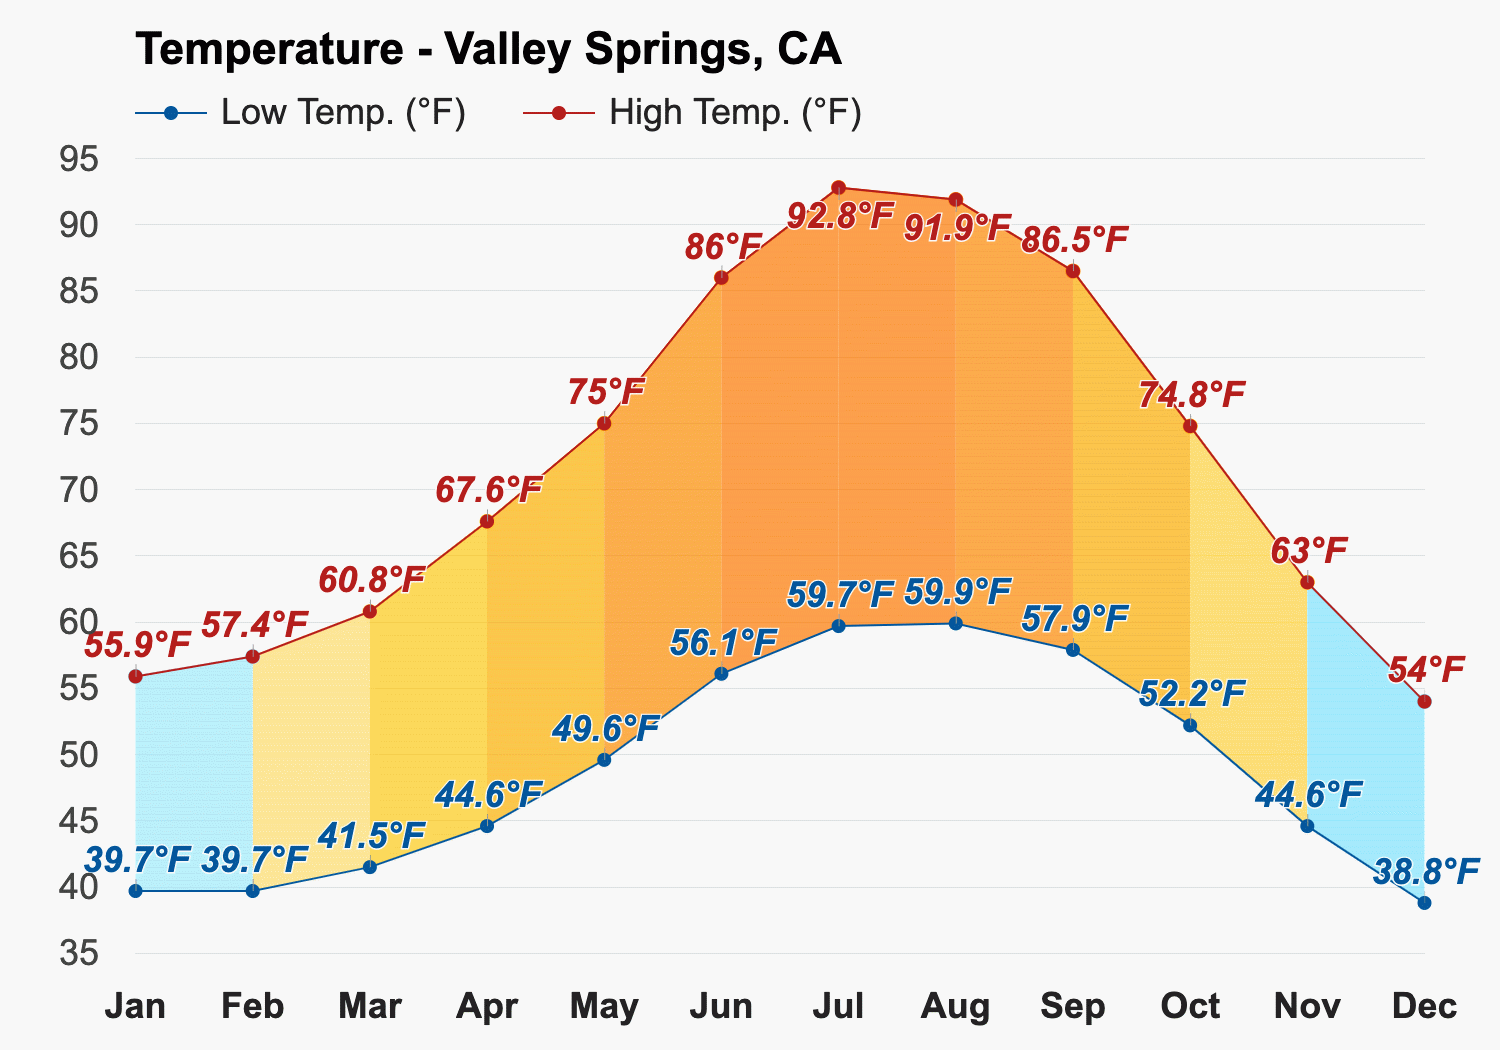 Valley Springs, CA - March 2024 Weather forecast - Spring forecast